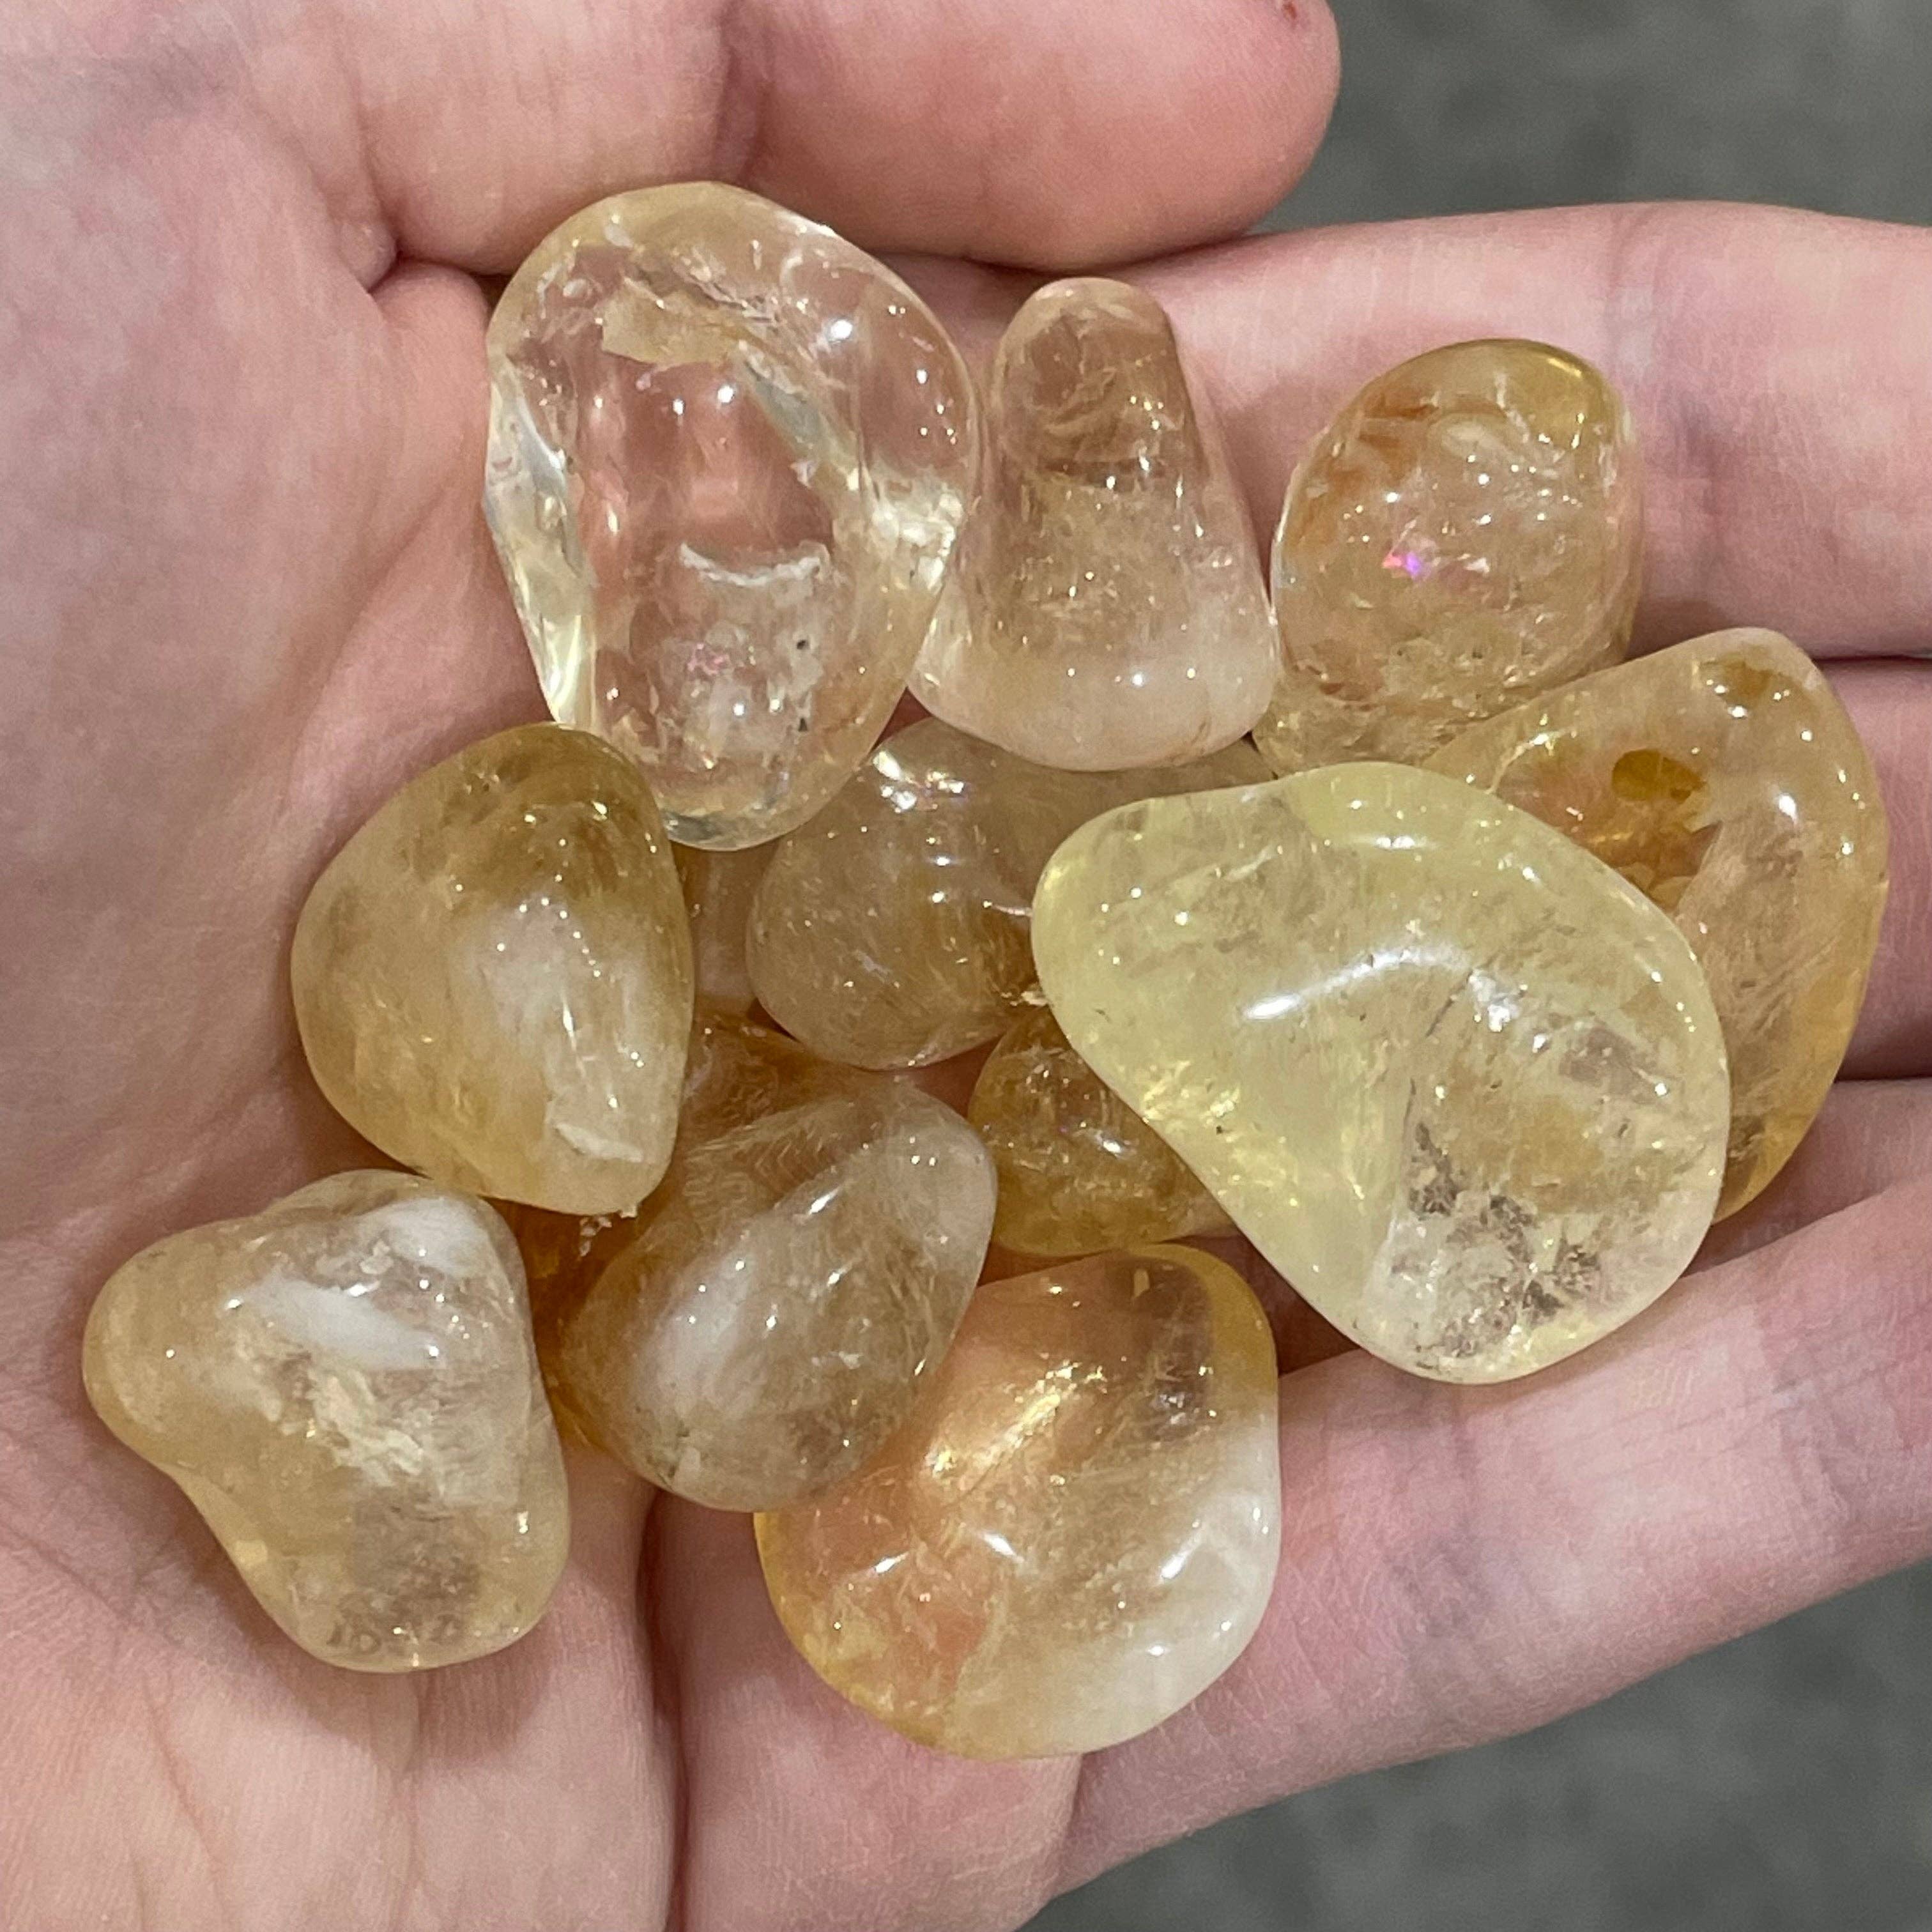 Citrine Tumbled 1 Lb Nice Quality - Coco and lulu boutique 